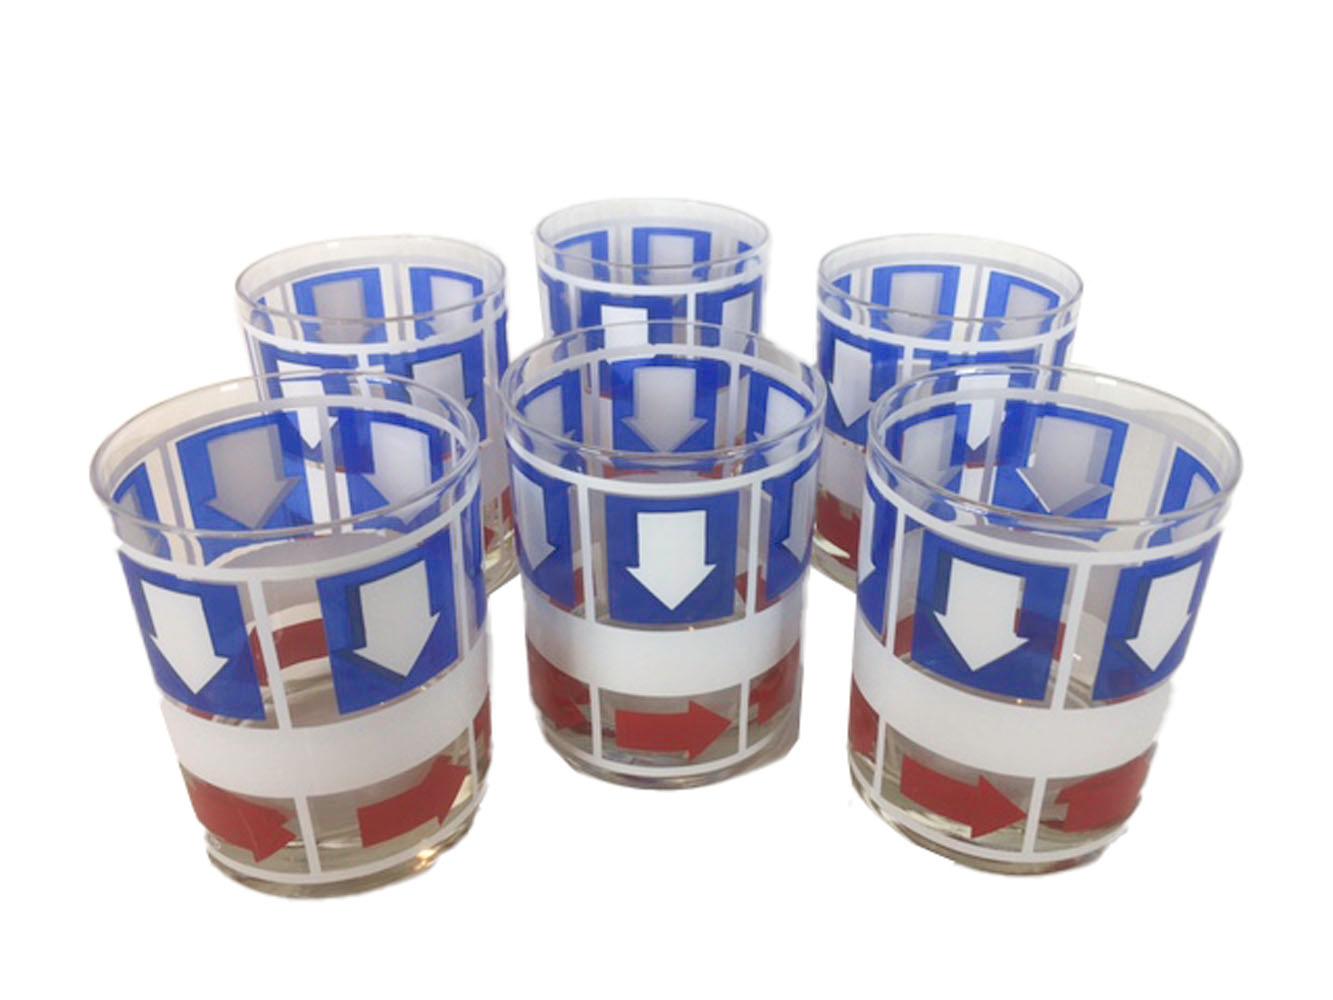 American Vintage Red, White and Blue Rocks Glasses by Bartrix For Sale